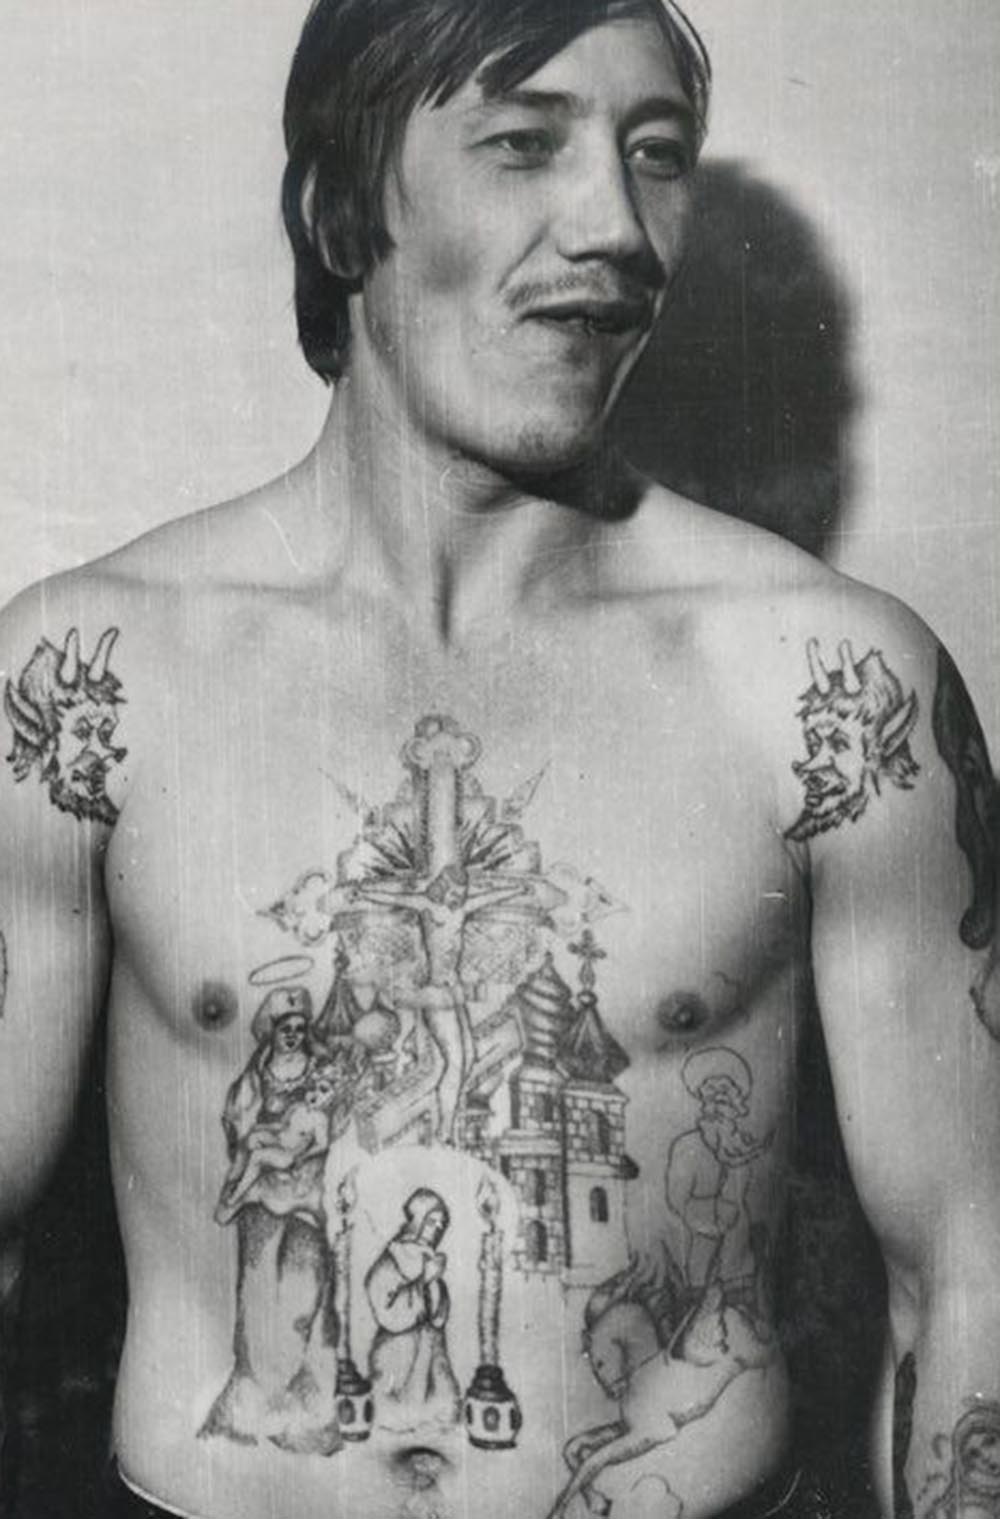 The devils on the shoulders of this inmate symbolise a hatred of authority and the prison structure. This type of tattoo is known as an 'oskal,' or grin, a baring of teeth towards the system. They are sometimes accompanied by anti-Soviet texts.